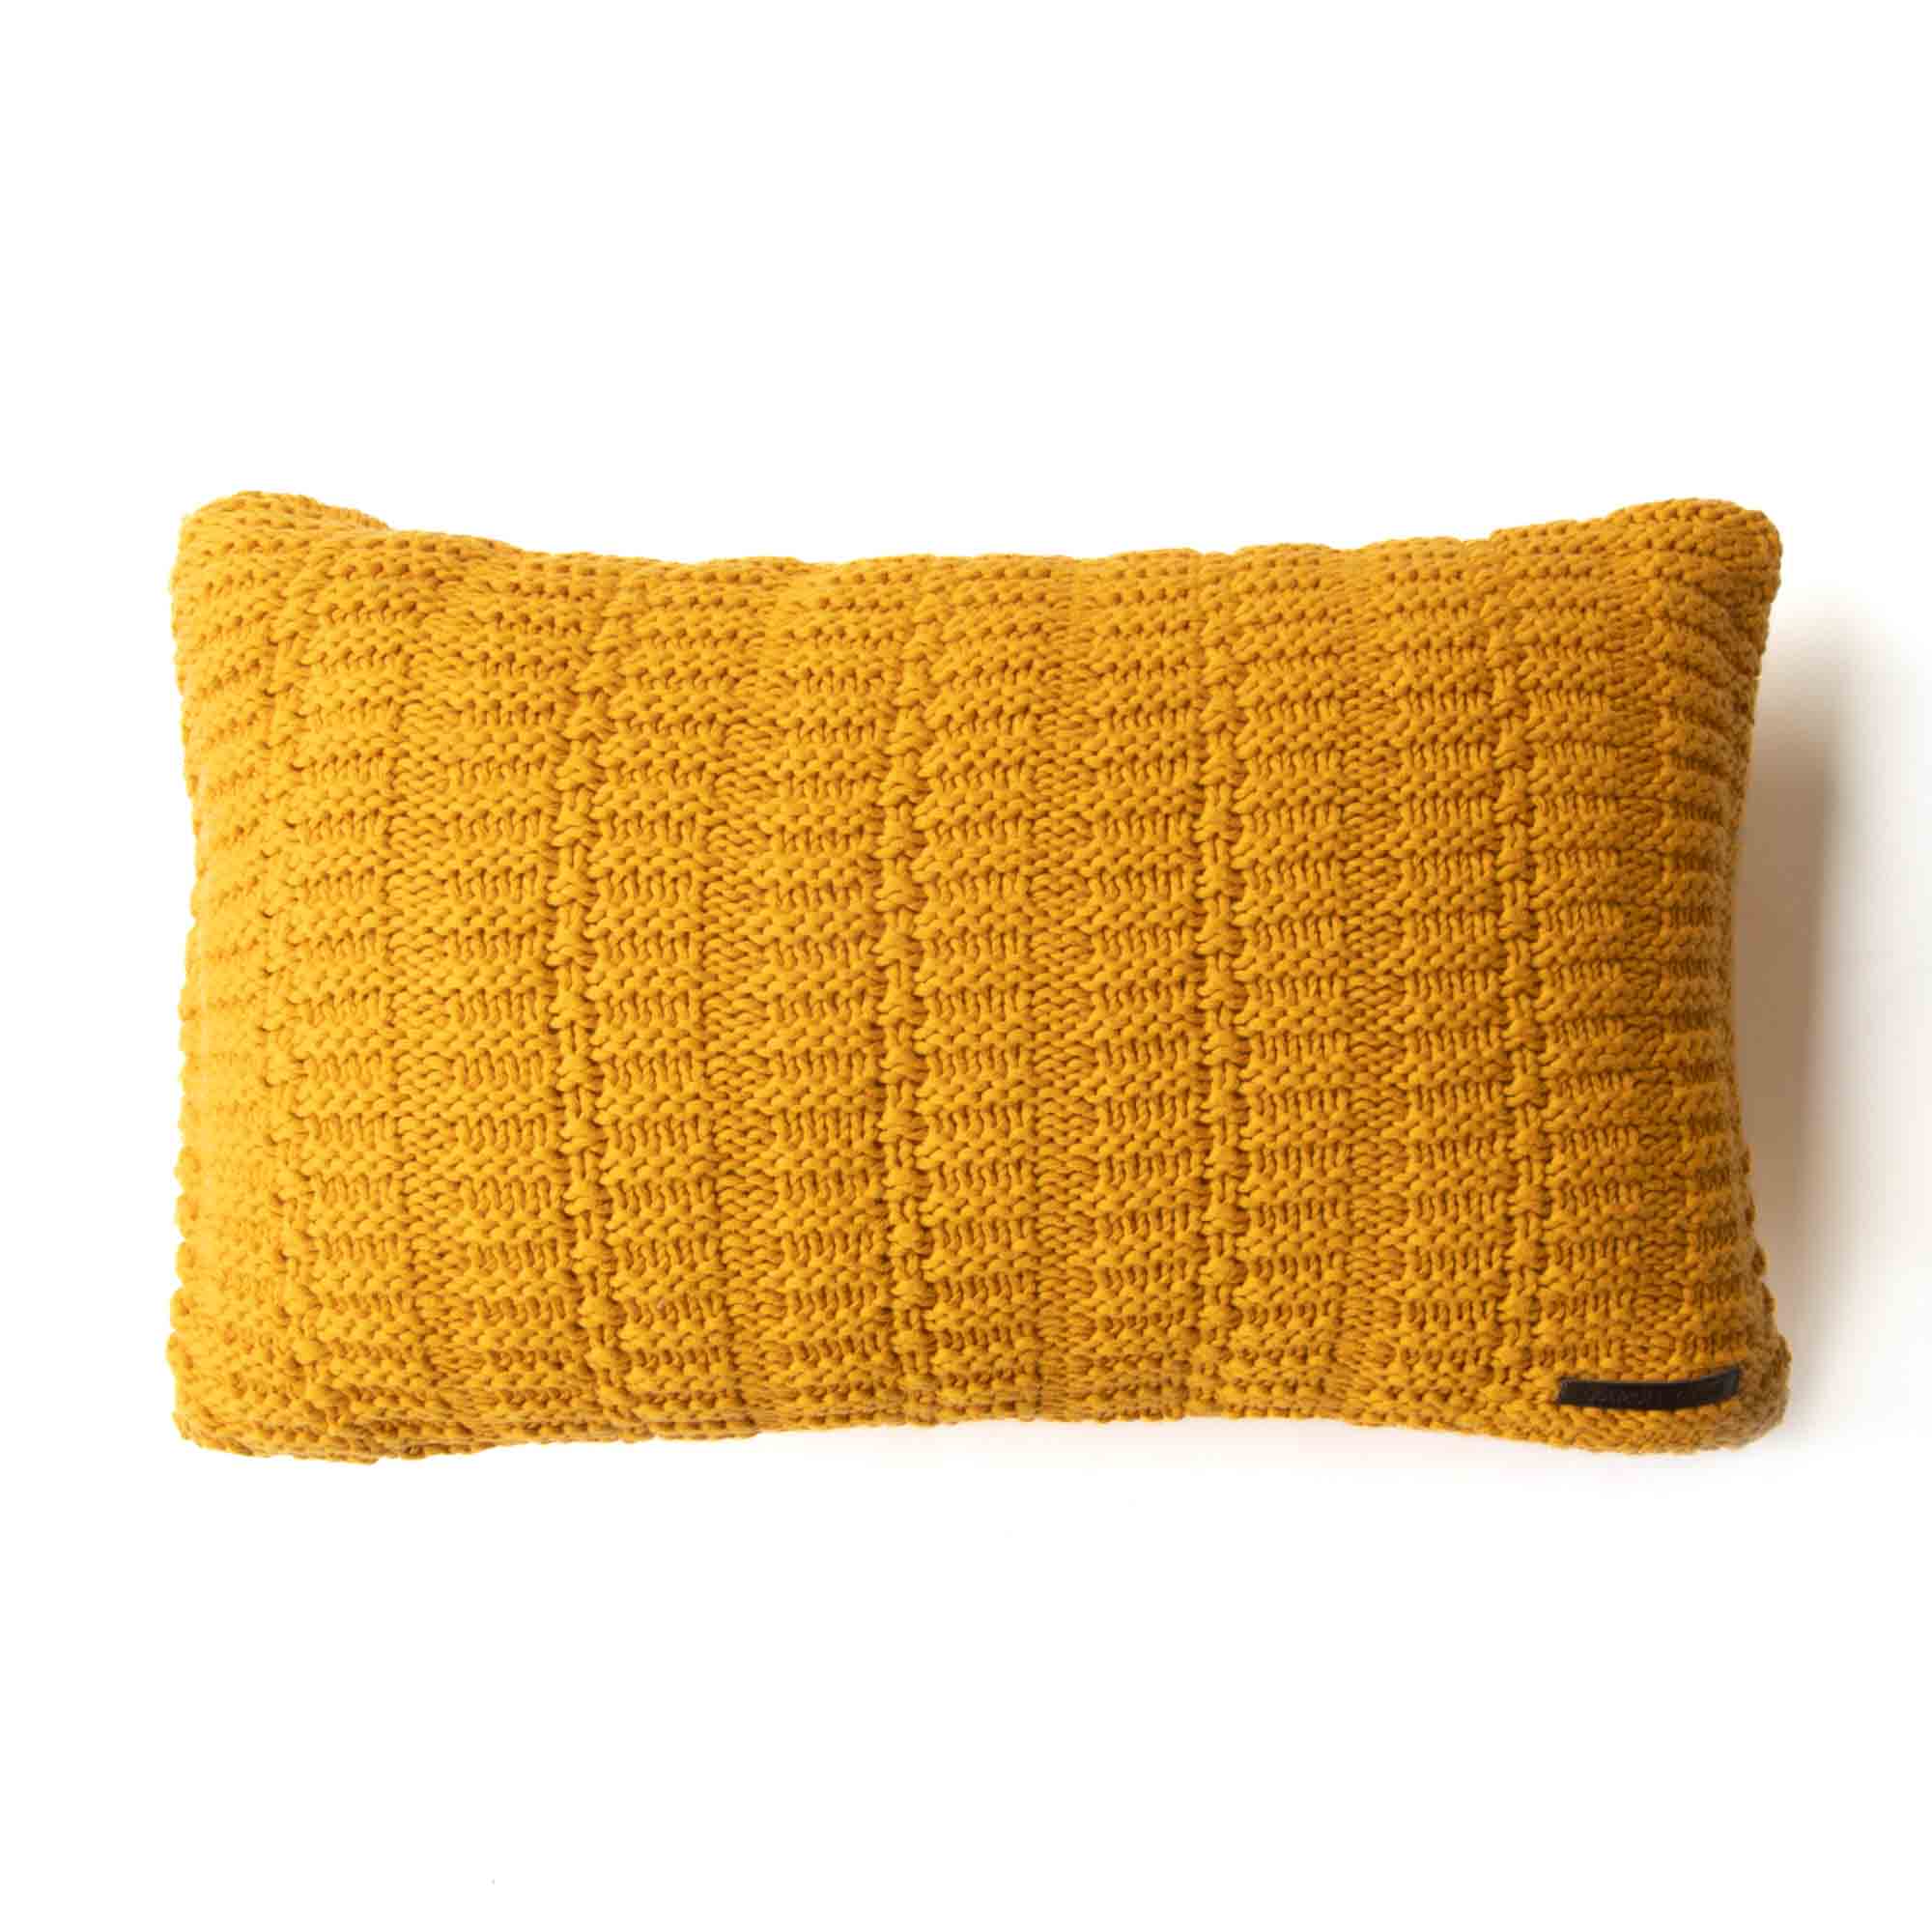 The Bobble Knit Cushion Cover